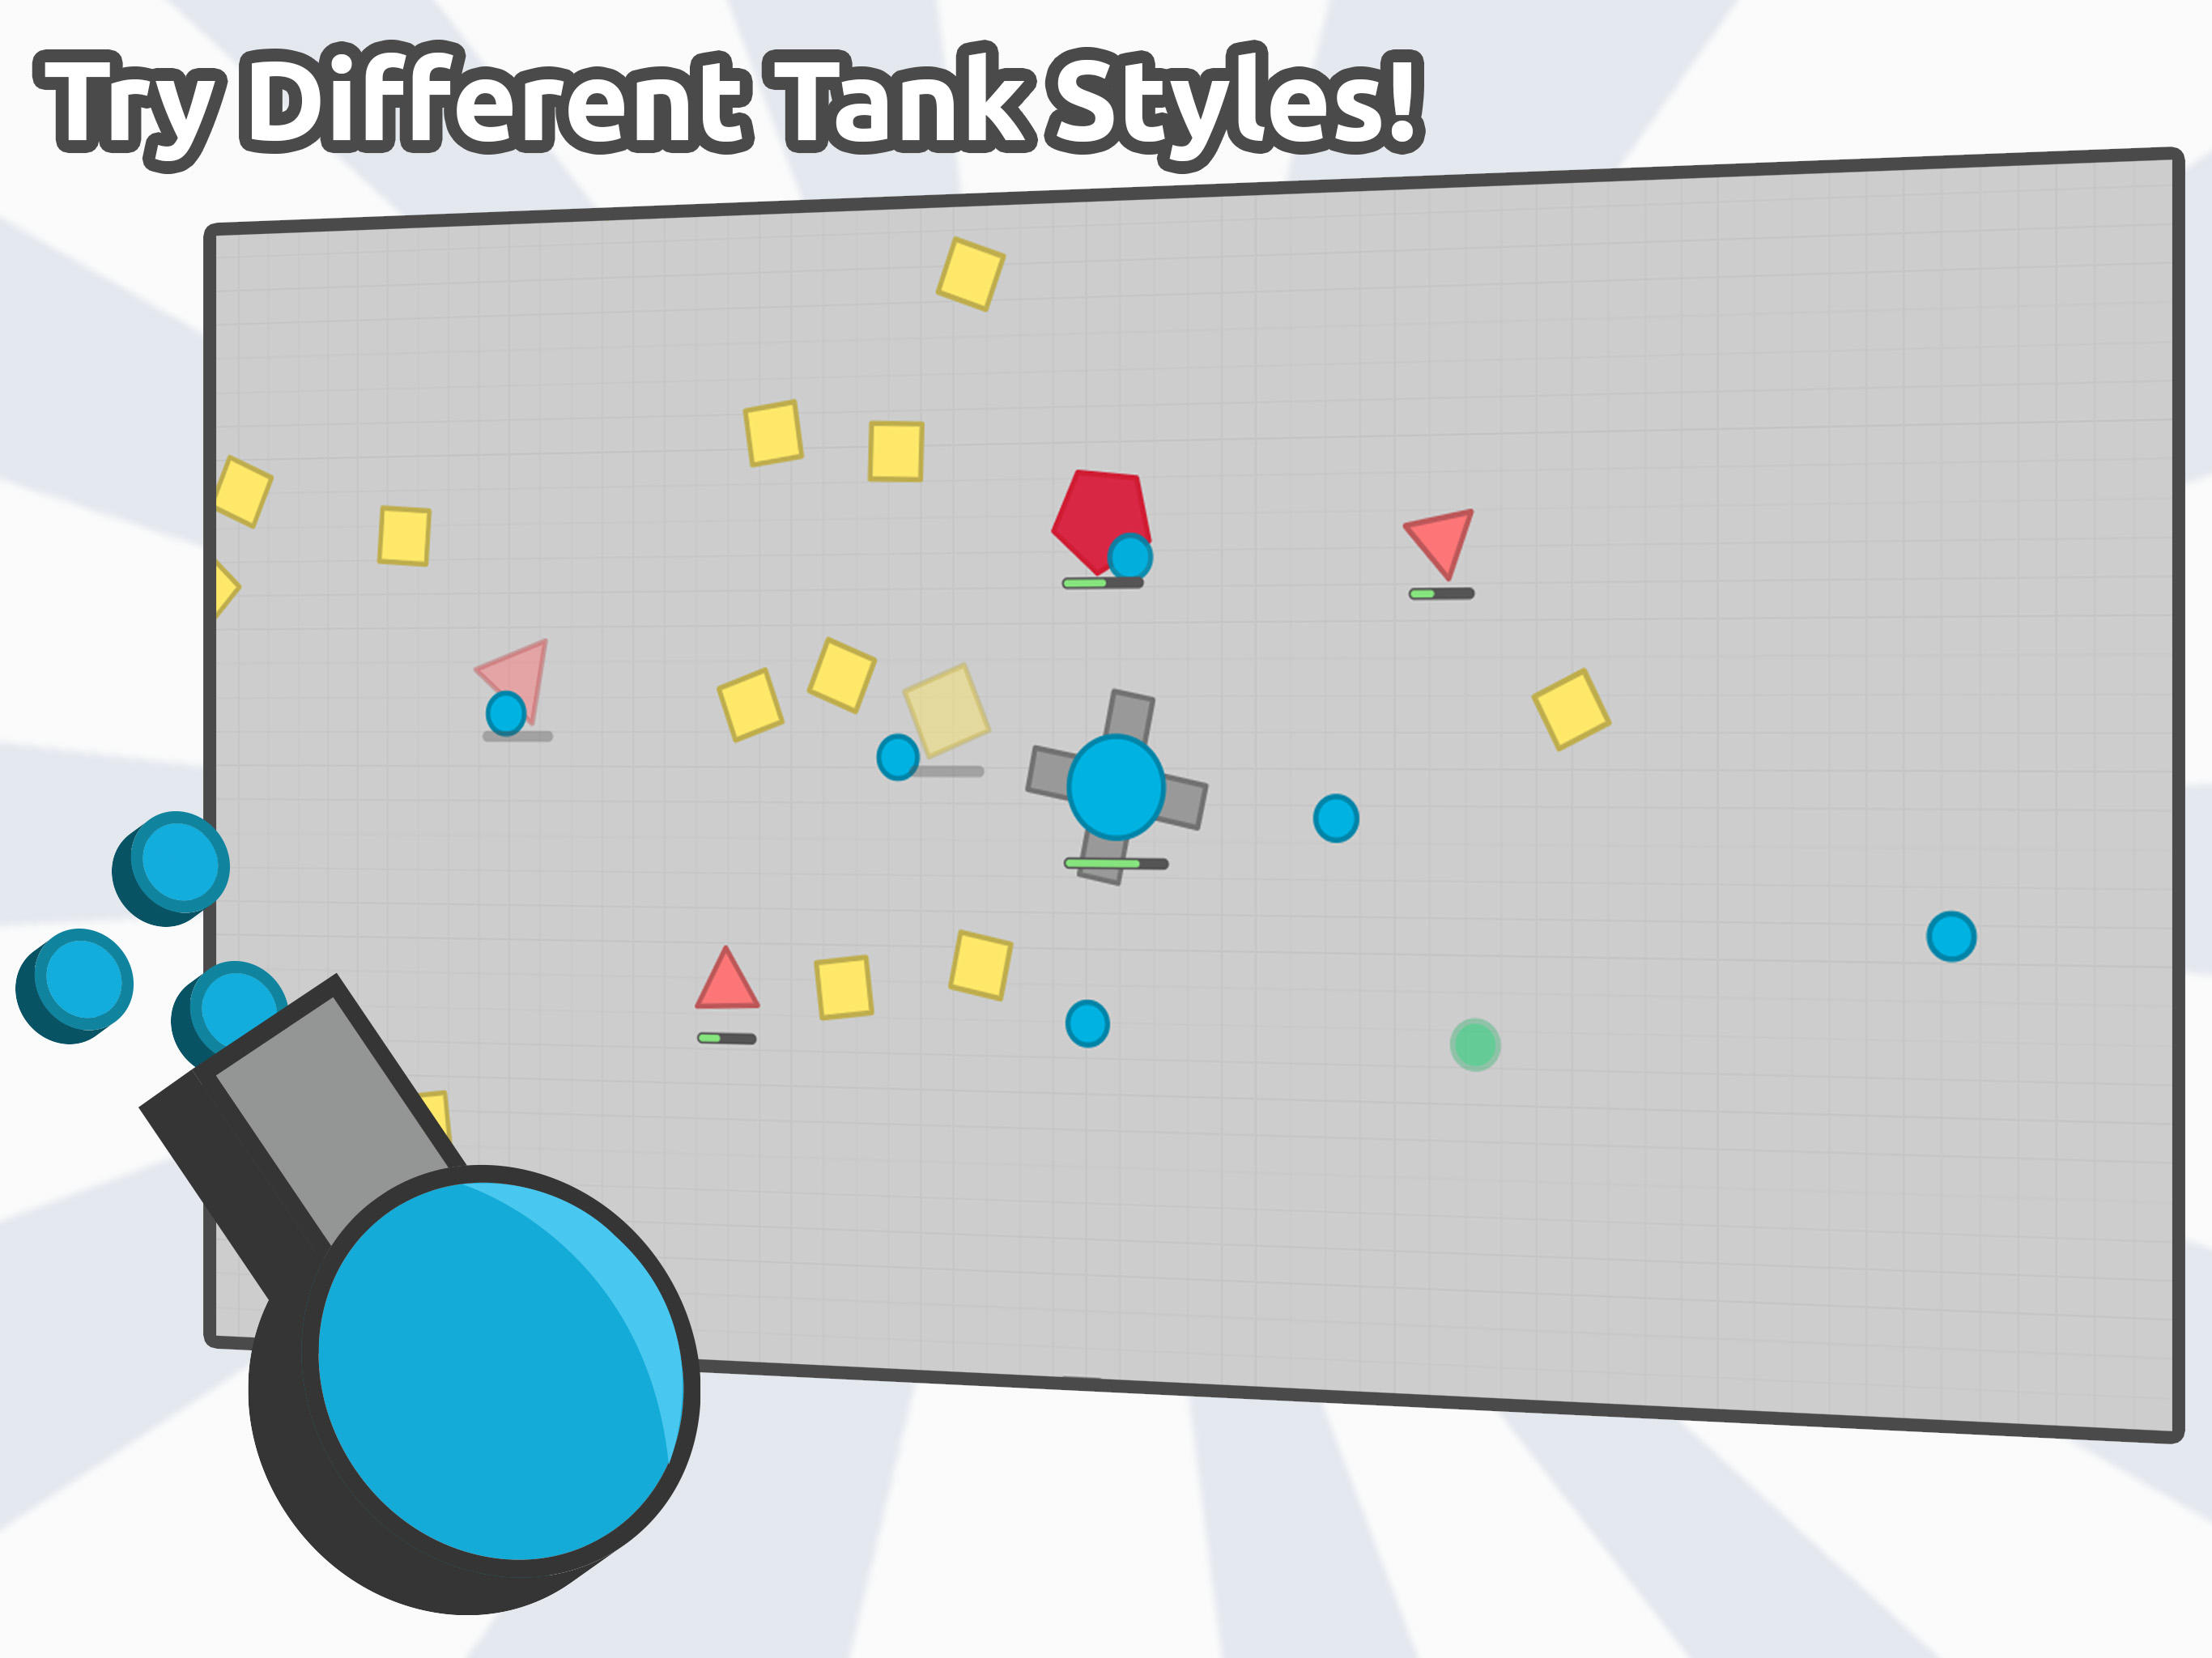 diep.io android iOS apk download for free-TapTap